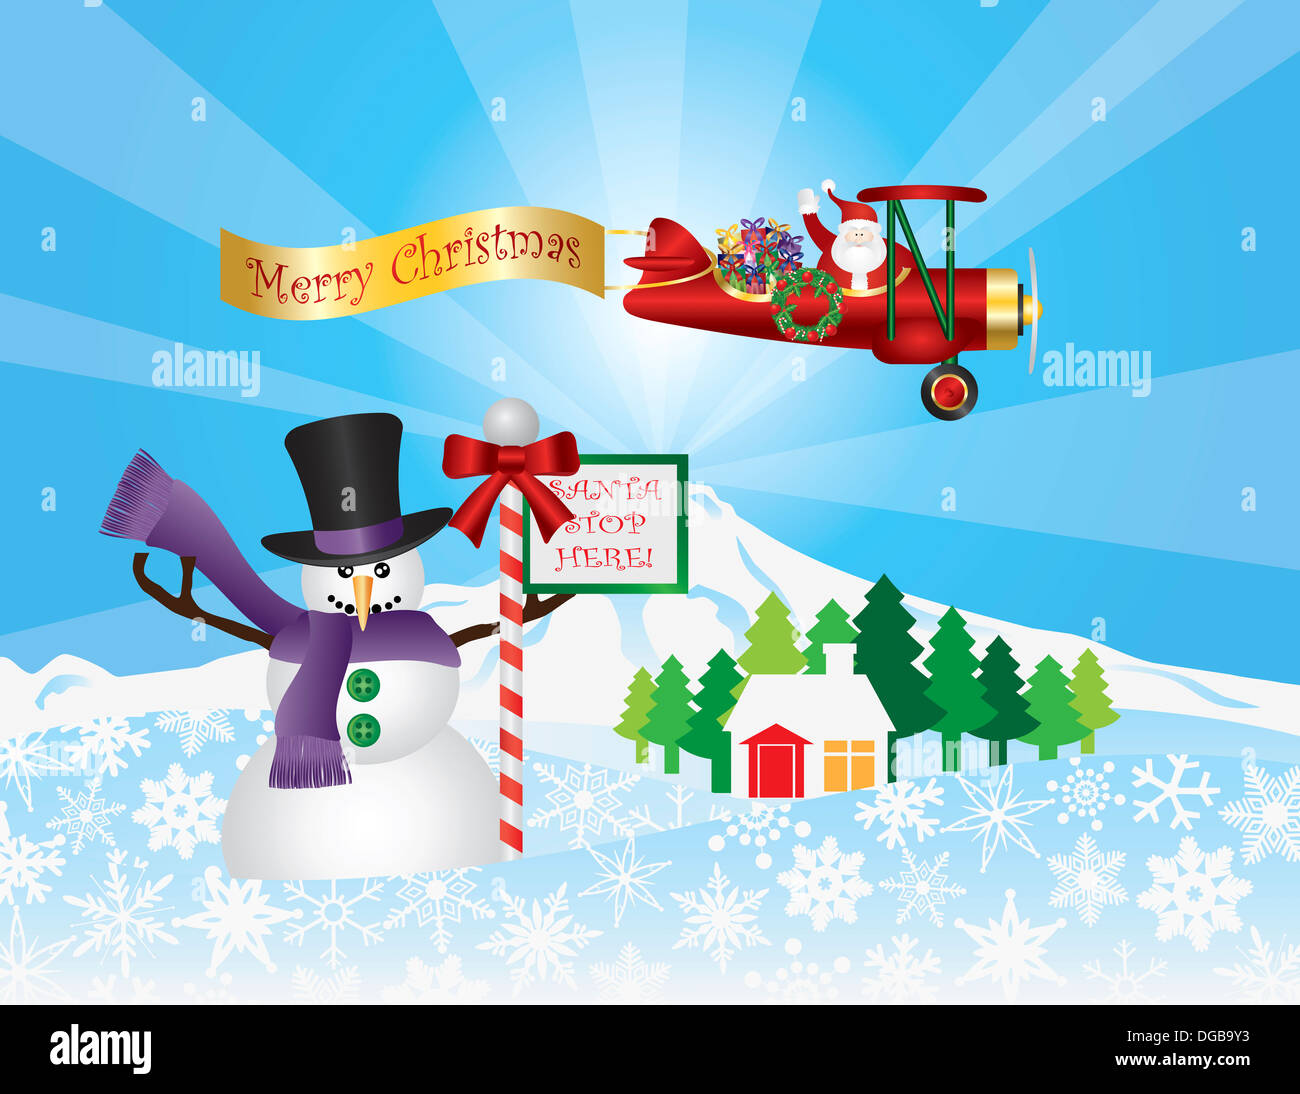 Santa Claus in Biplane Flying Over Winter Snow Scene with Snowman House Trees and Stop Sign